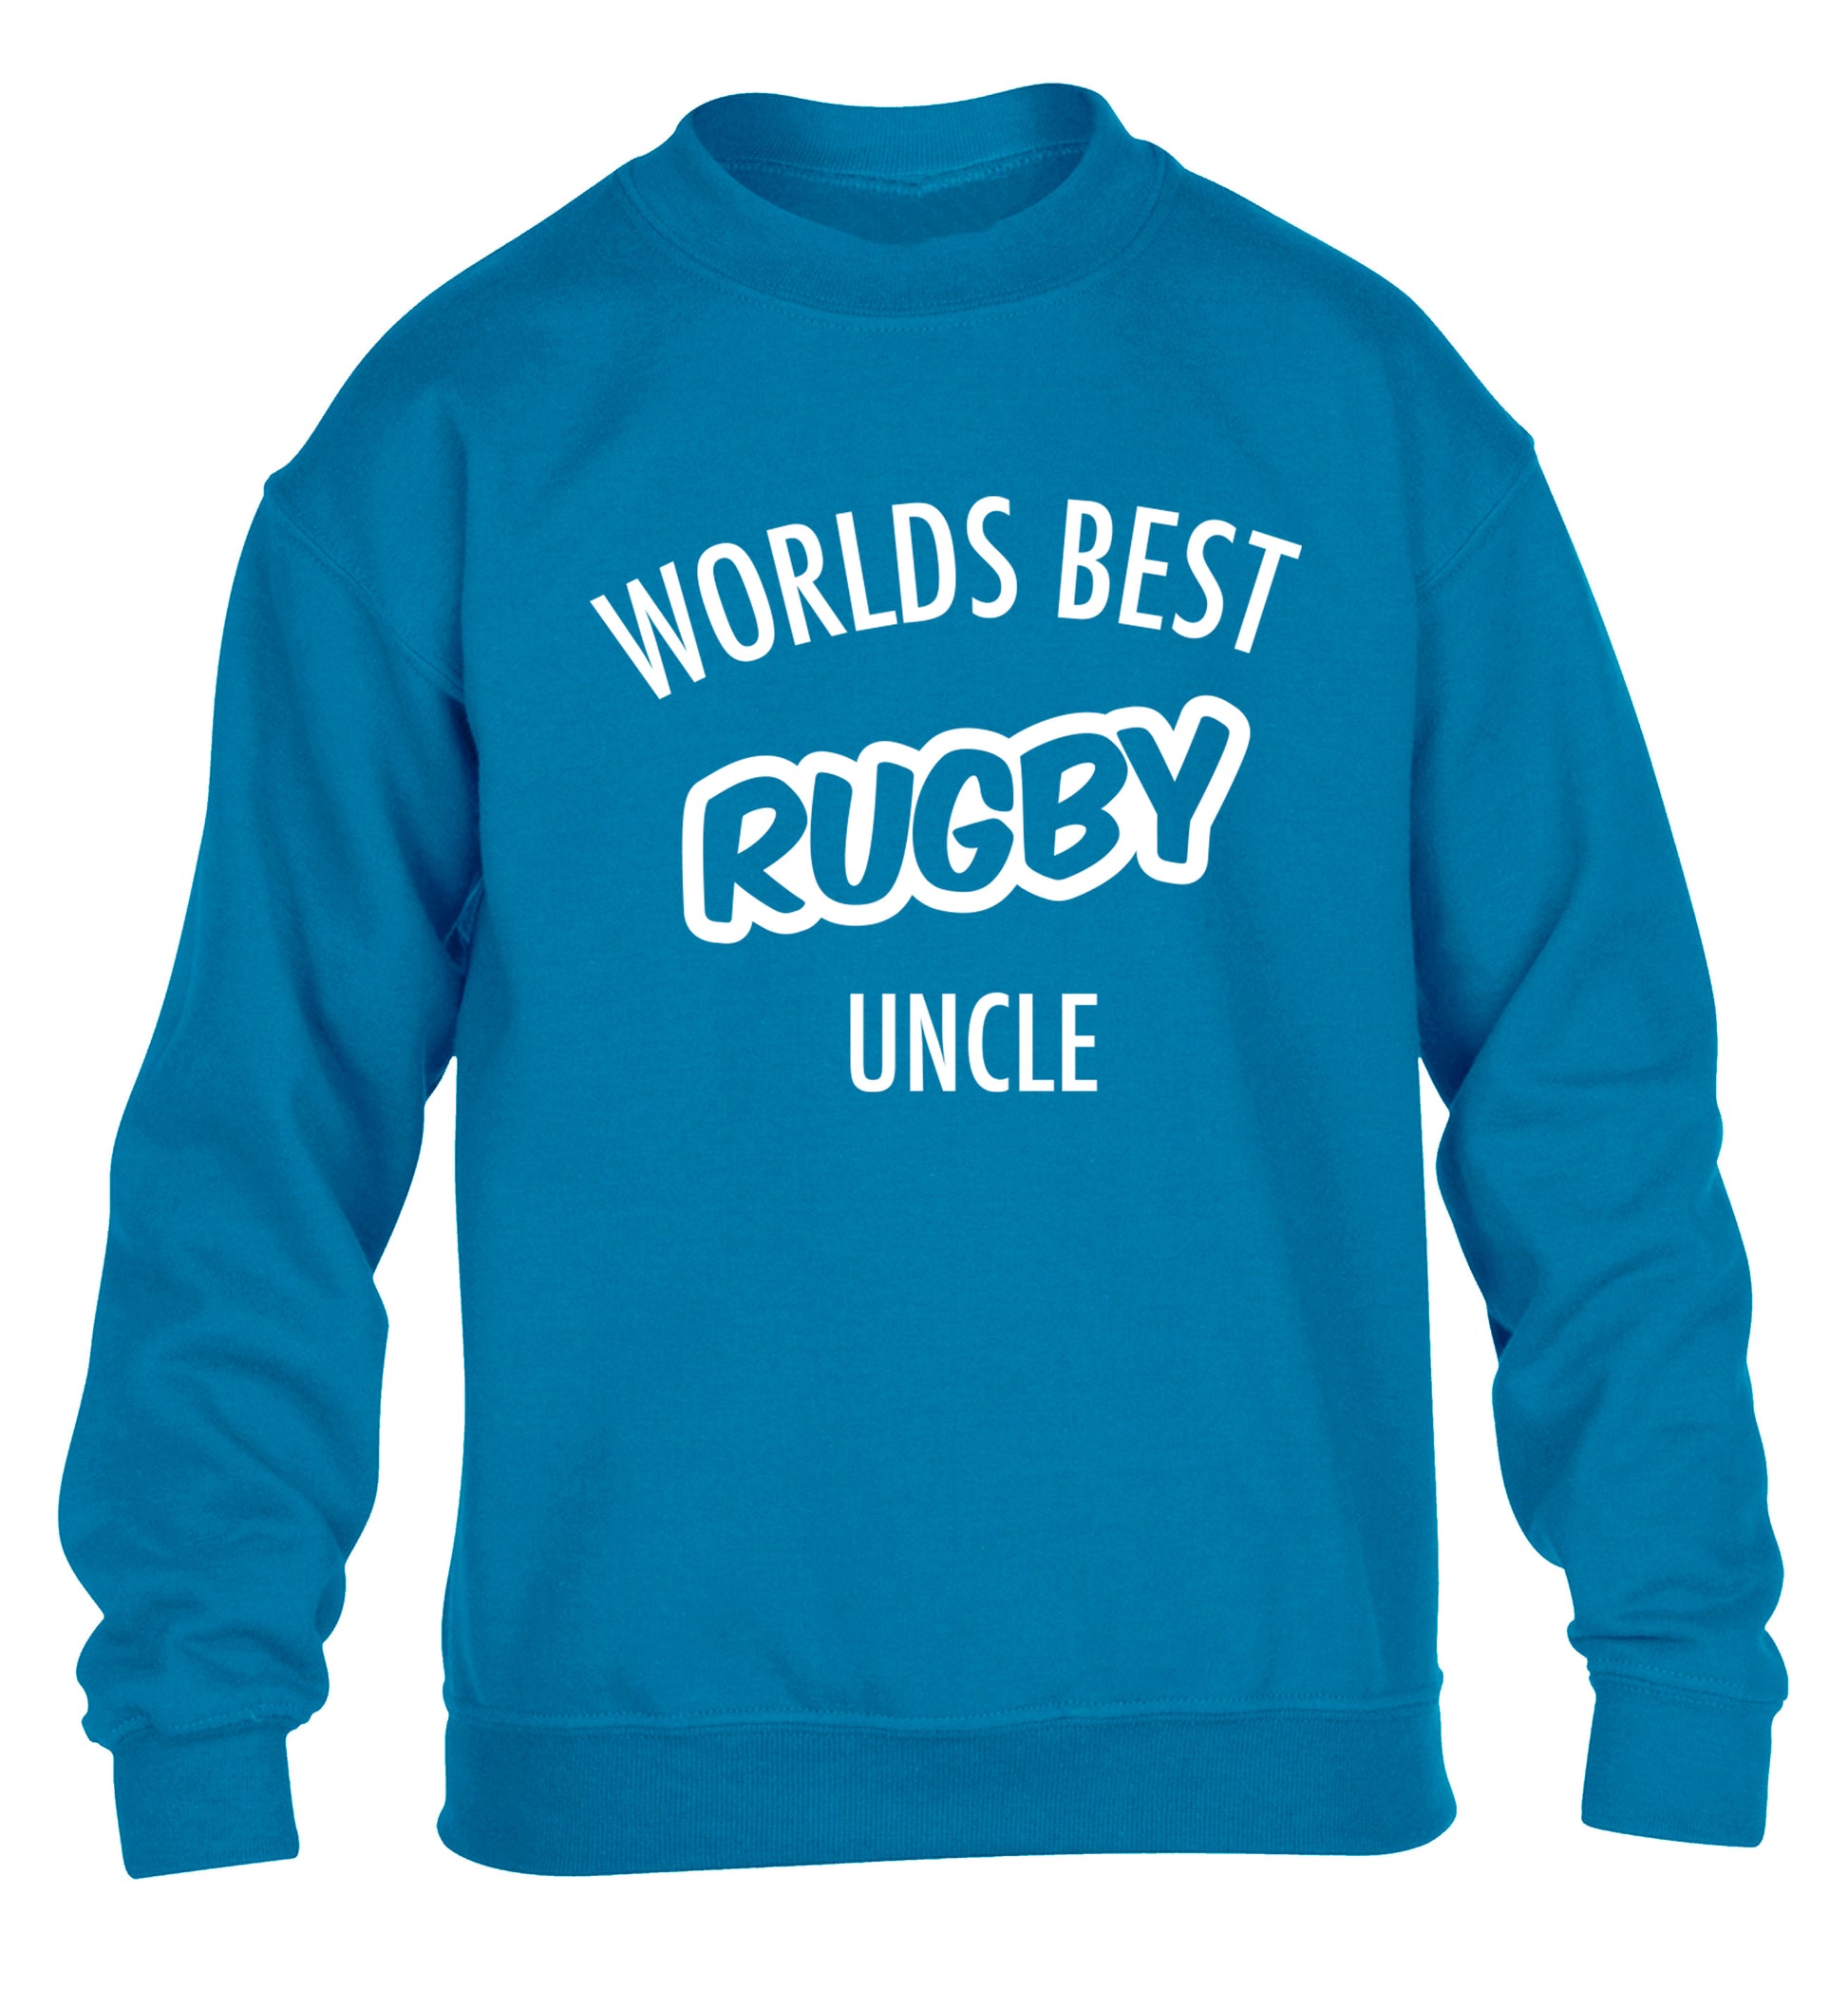 Worlds best rugby uncle children's blue sweater 12-13 Years